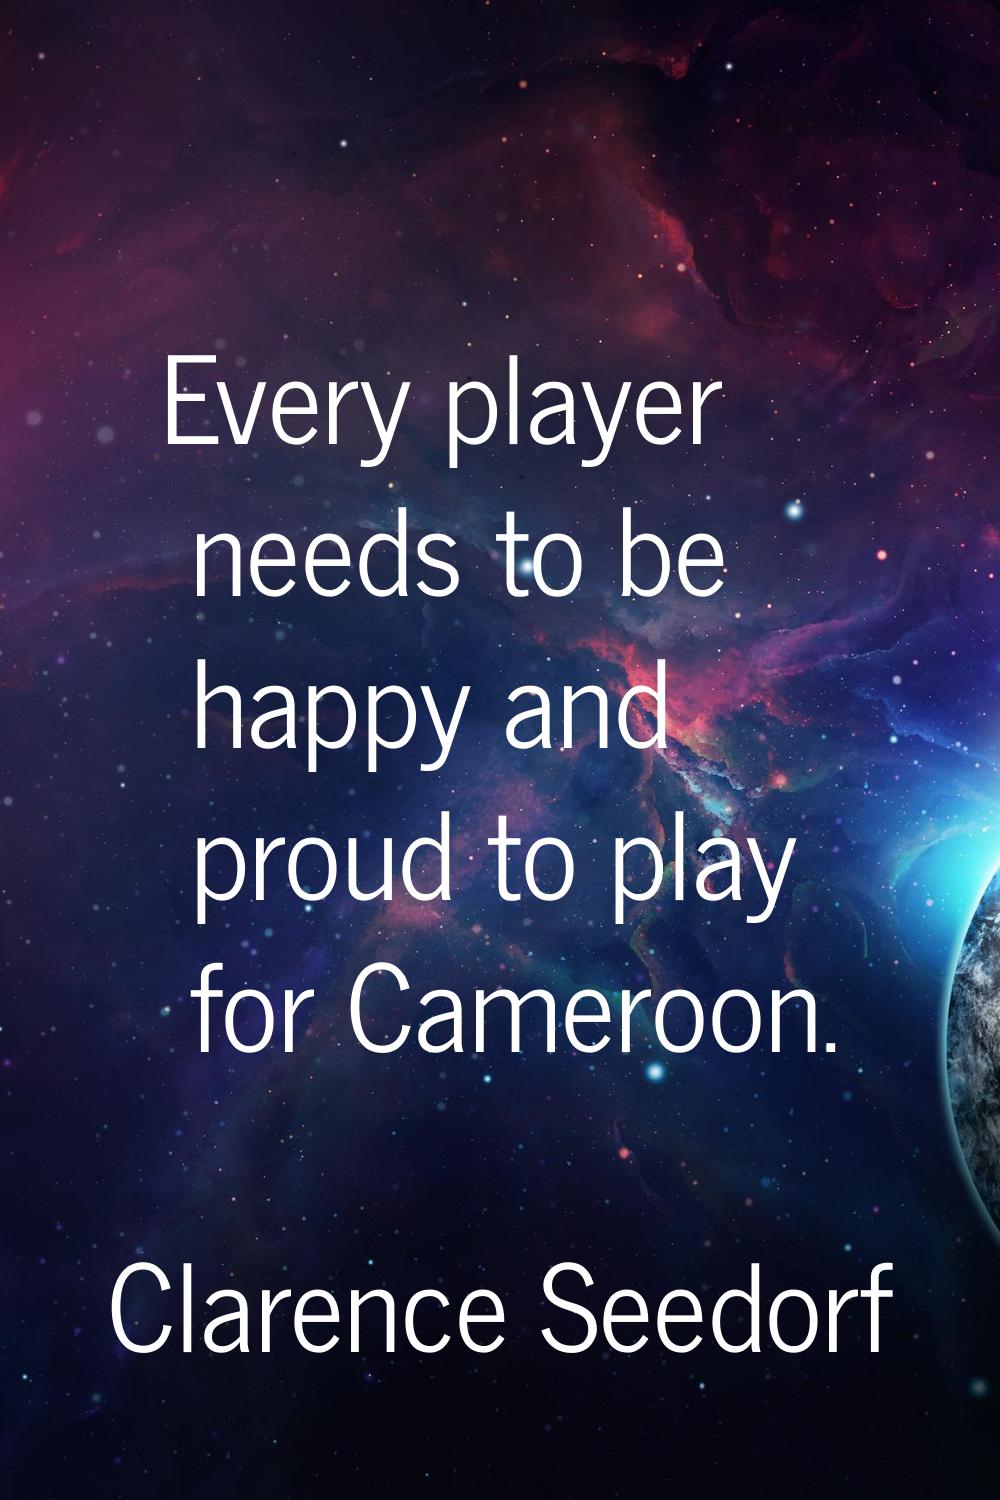 Every player needs to be happy and proud to play for Cameroon.